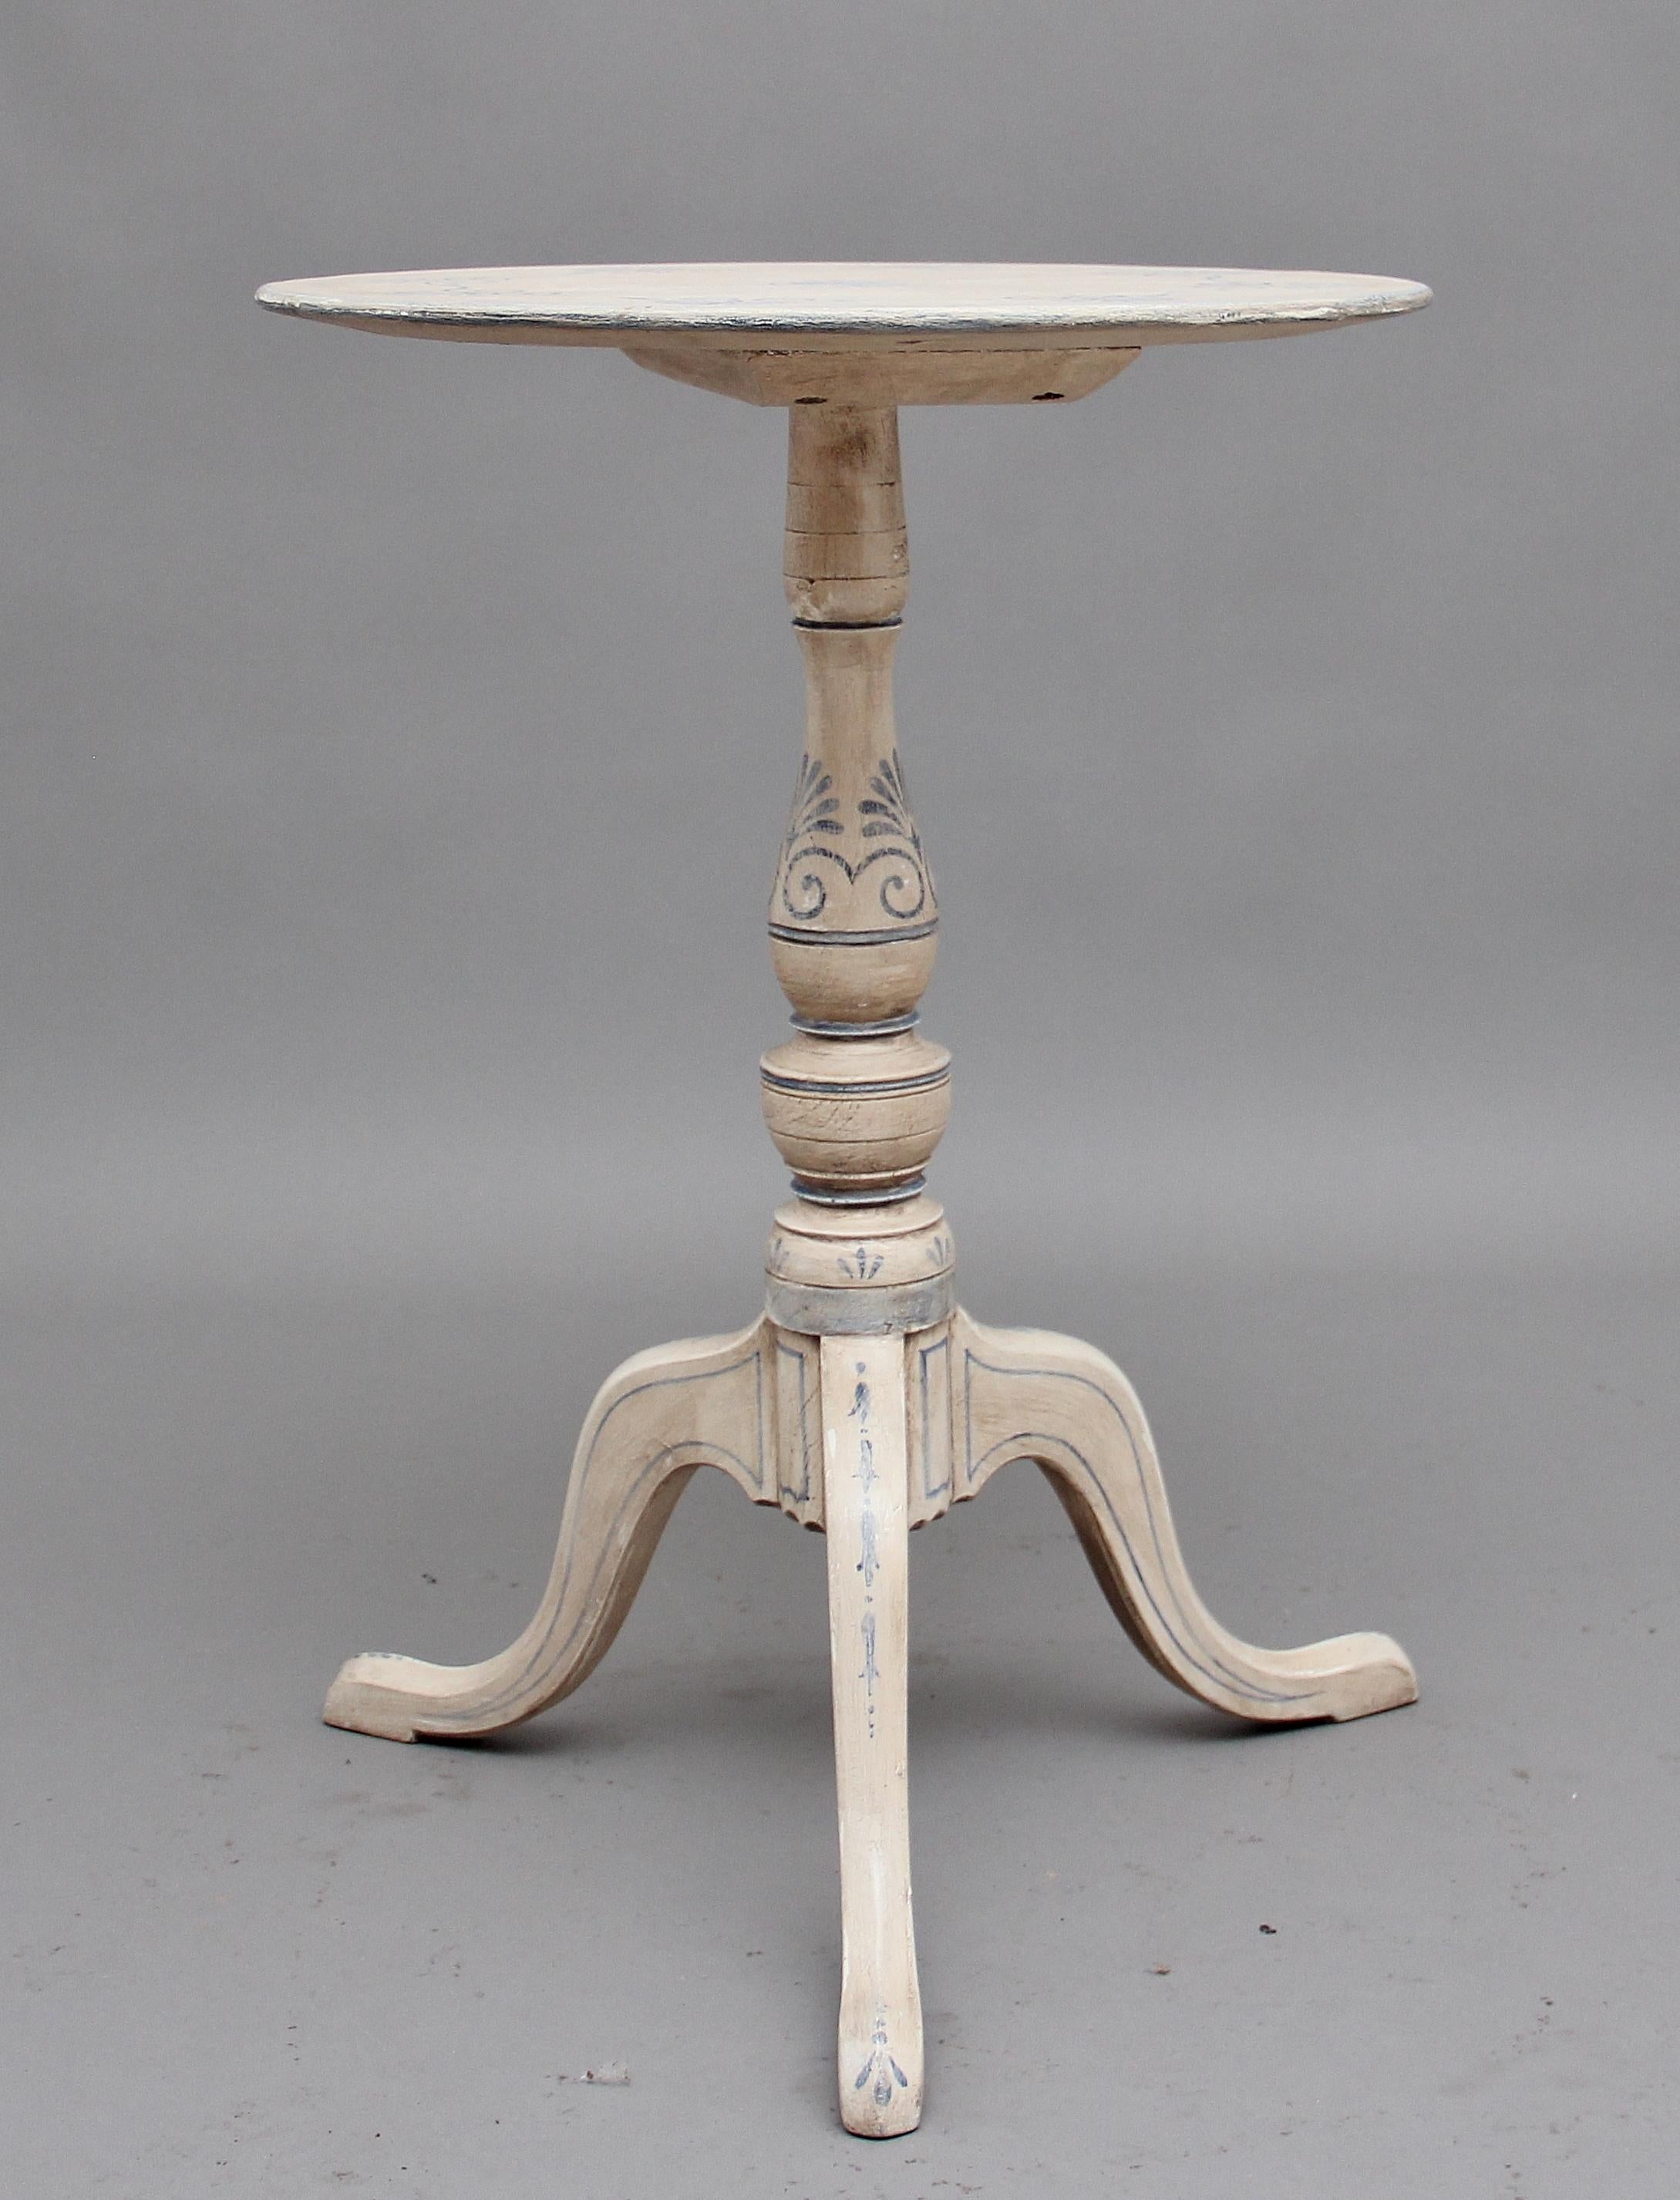 Edwardian Decorative Early 20th Century Painted Tripod Table